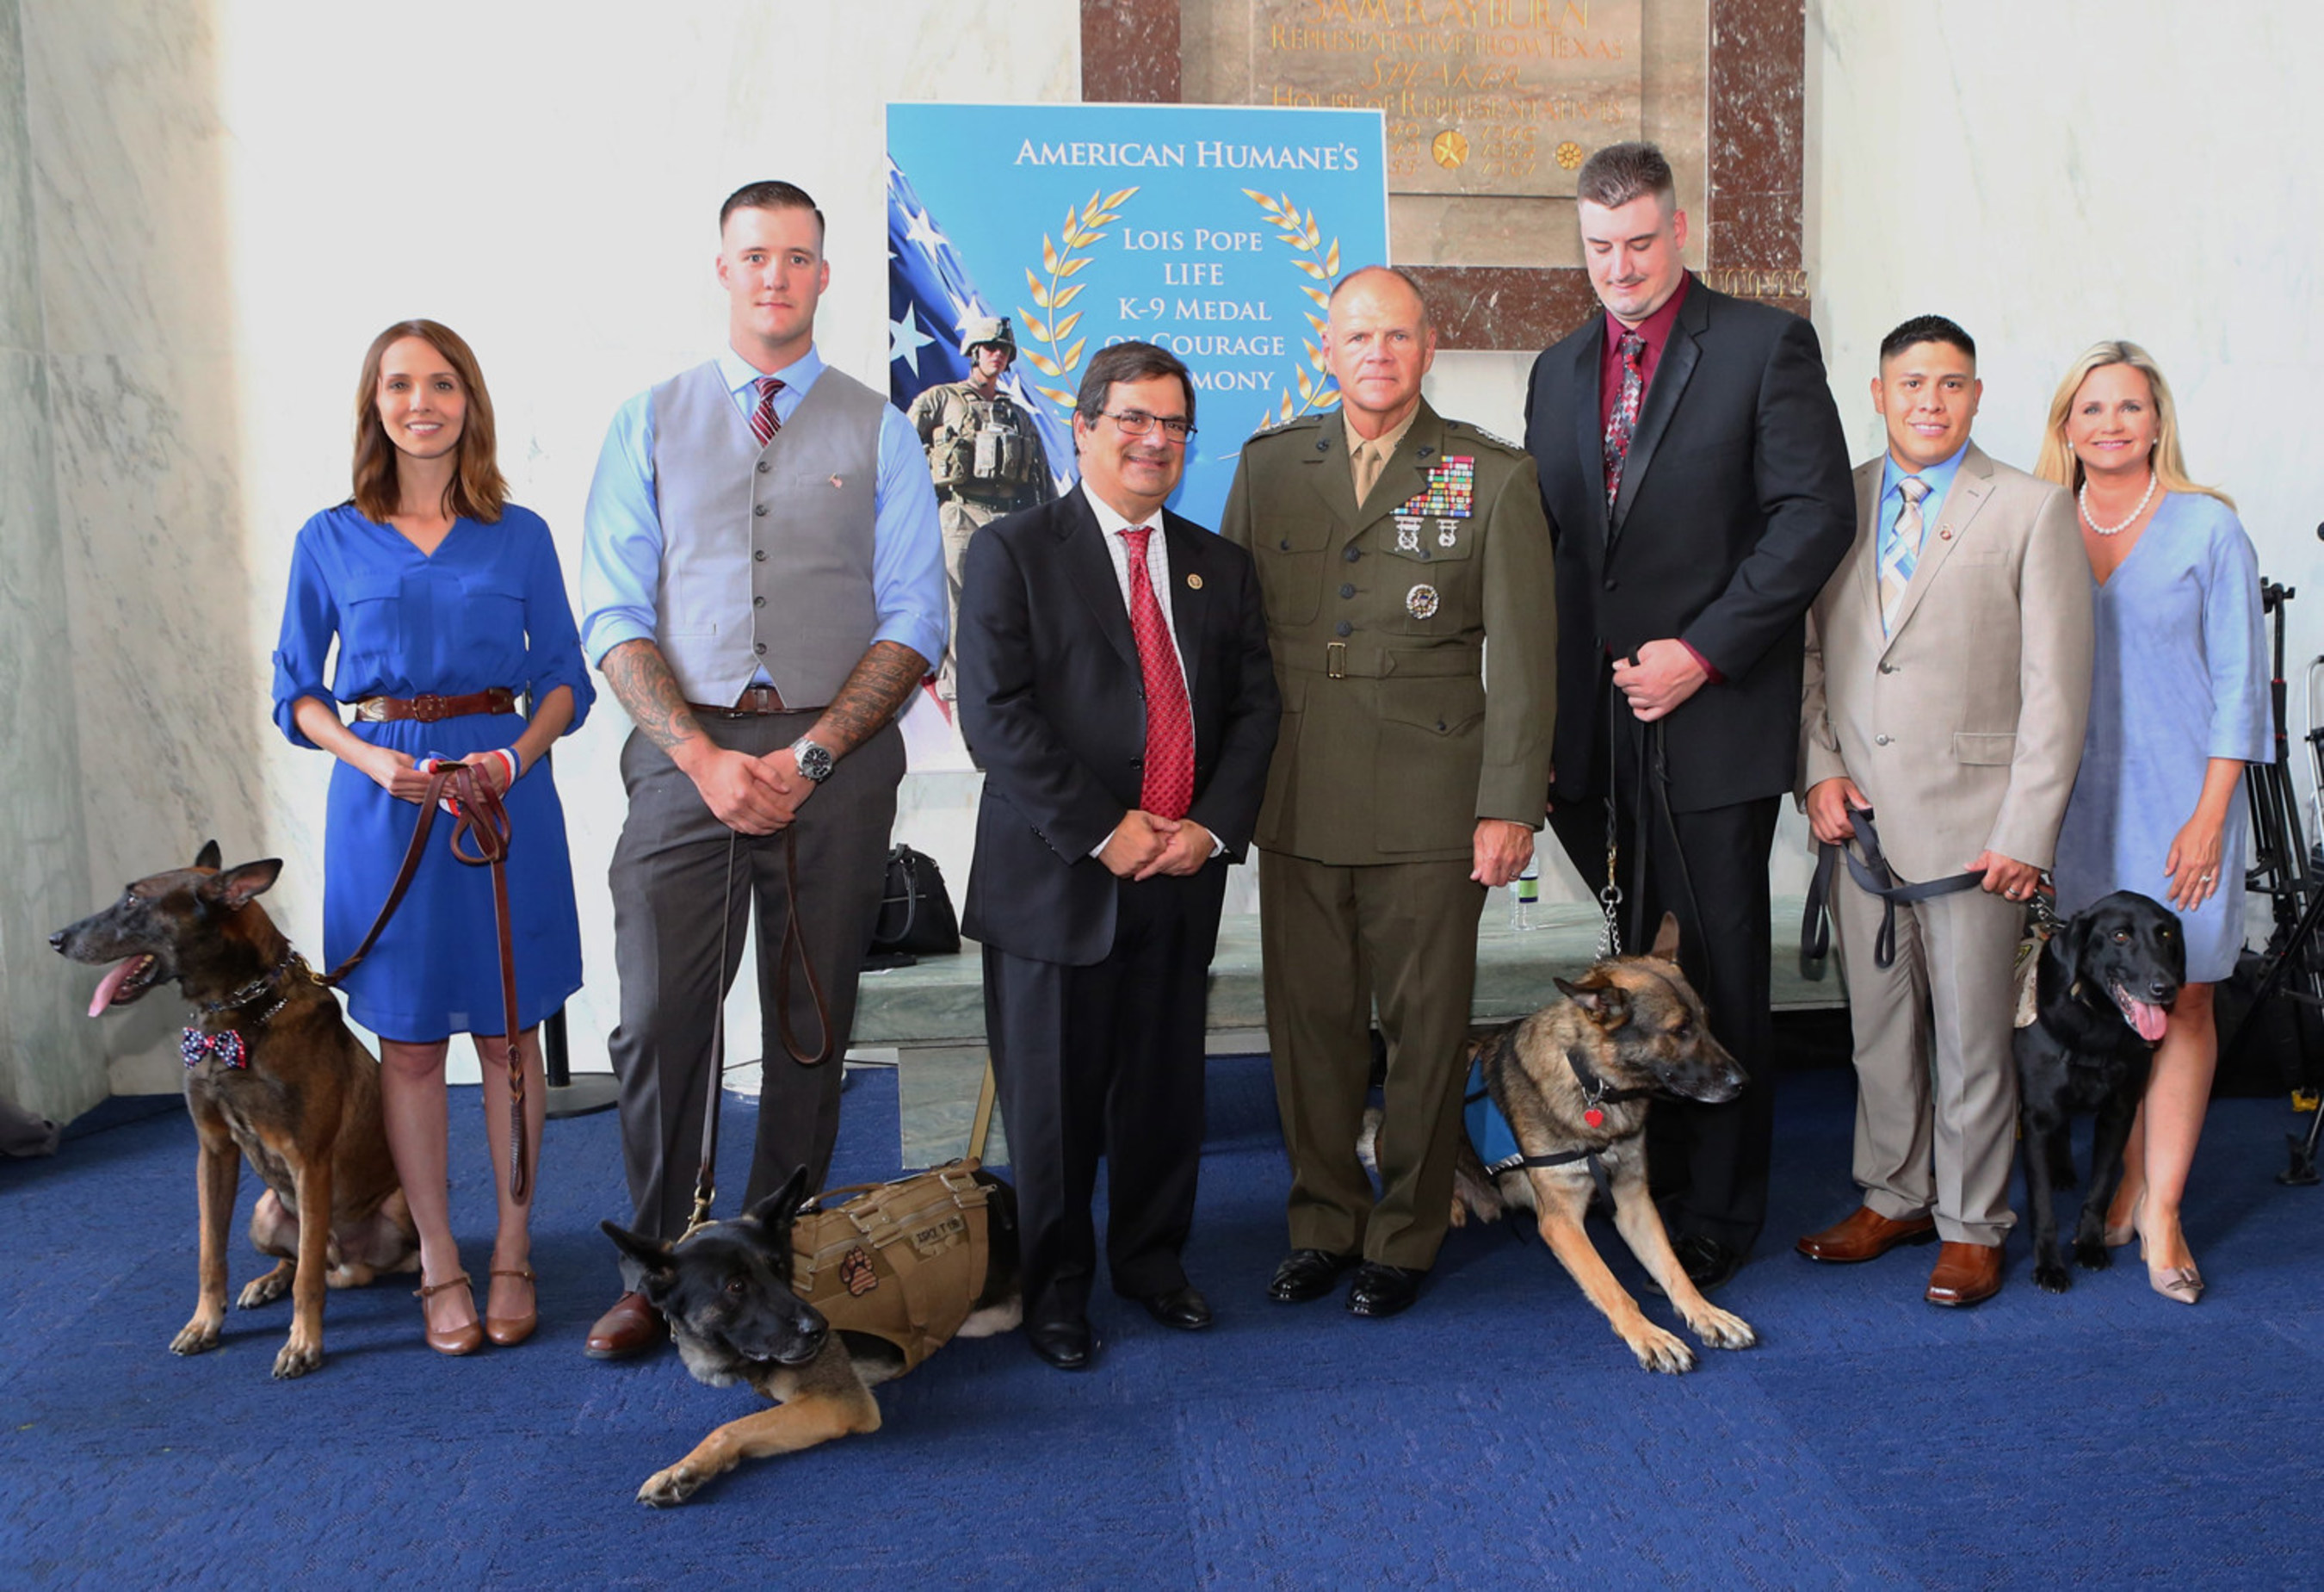 HONORING OUR K9 MILITARY HEROES (left to right): MWD Bond, Sarah Browning, Sgt. Wess Brown, MWD Isky, Congressman Gus Bilirakis, General Robert B. Neller, MWD Matty, Spc. Brent Grommet, Corp. Nick Caceres, CWD Fieldy, American Humane President Dr. Robin Ganzert